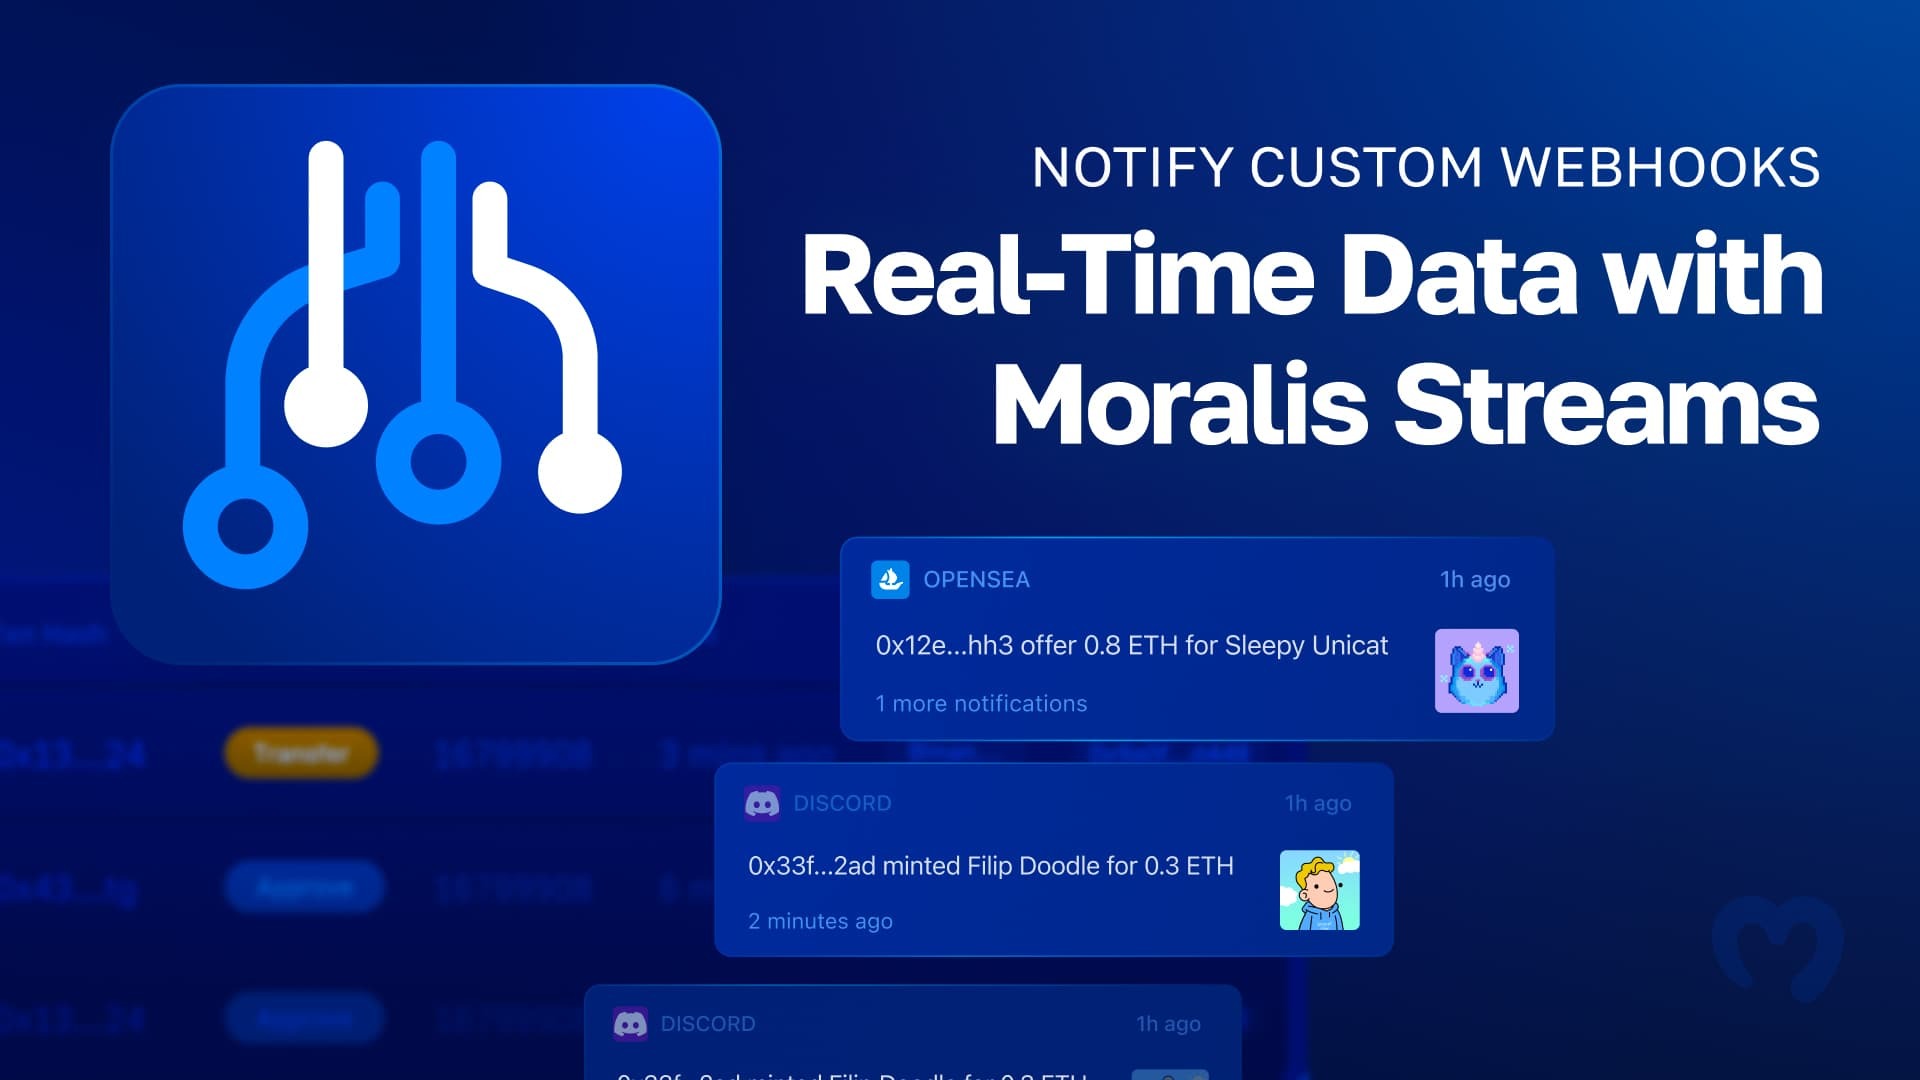 Notify Custom Webhooks - Real-Time Data with Moralis Streams